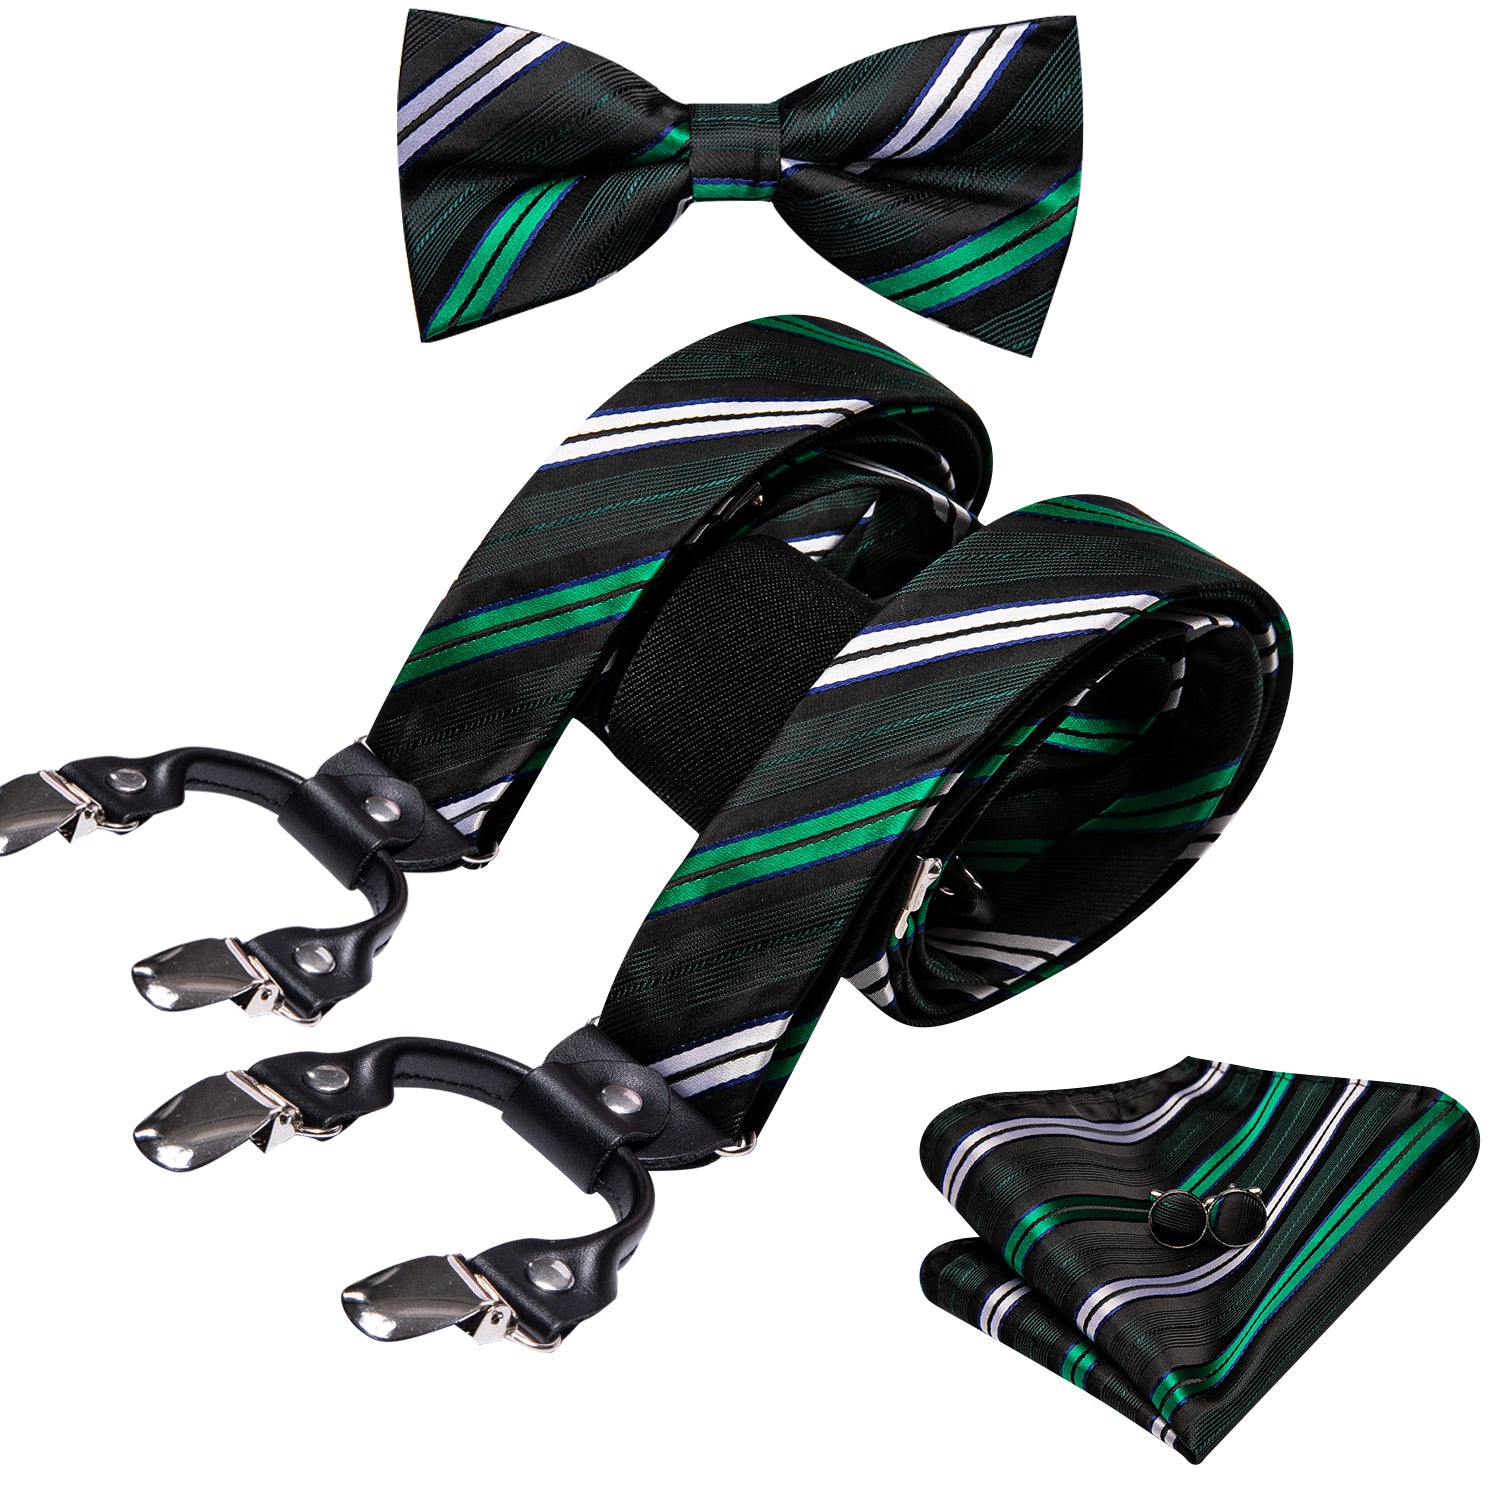 Barry.wang Black Tie Green White Striped Y Back Adjustable Bow Tie Suspenders Set